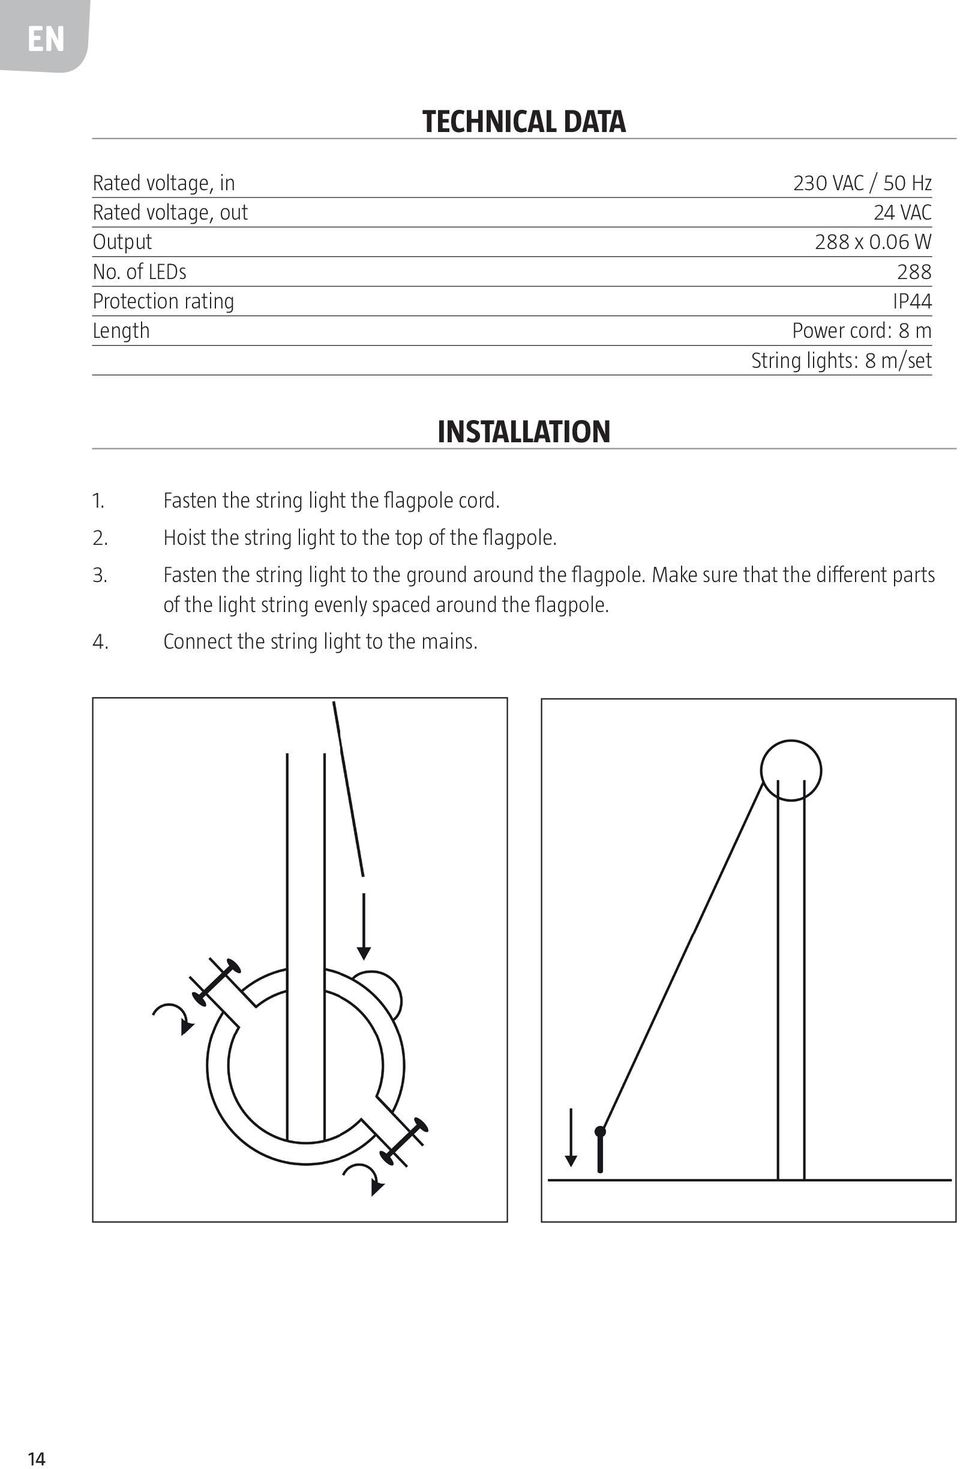 Fasten the string light the flagpole cord. 2. Hoist the string light to the top of the flagpole. 3.